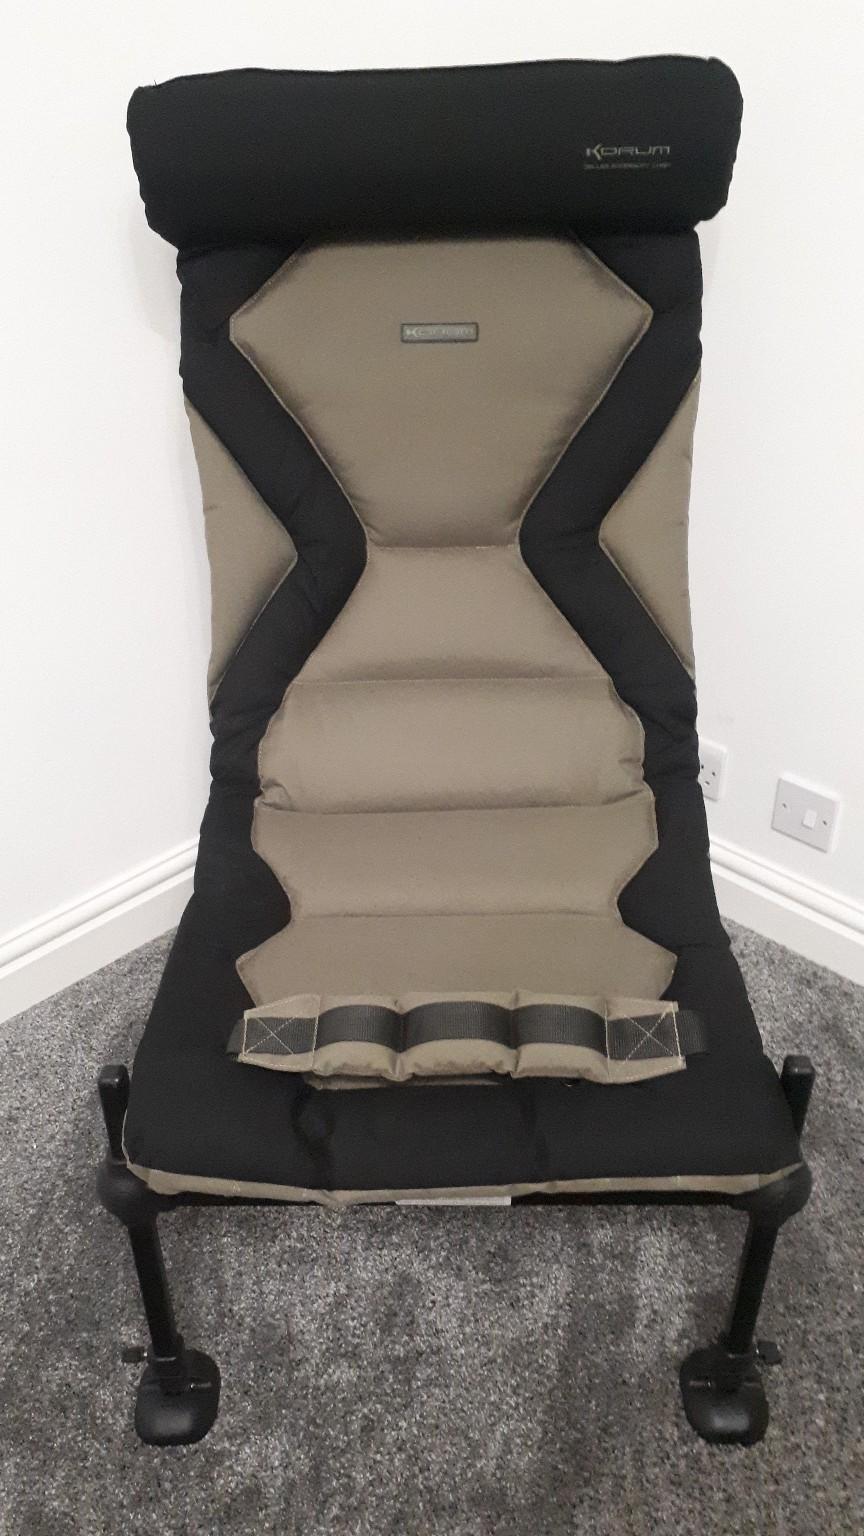 Korum Chair And Net Bag Standard And XL Verions Availaible